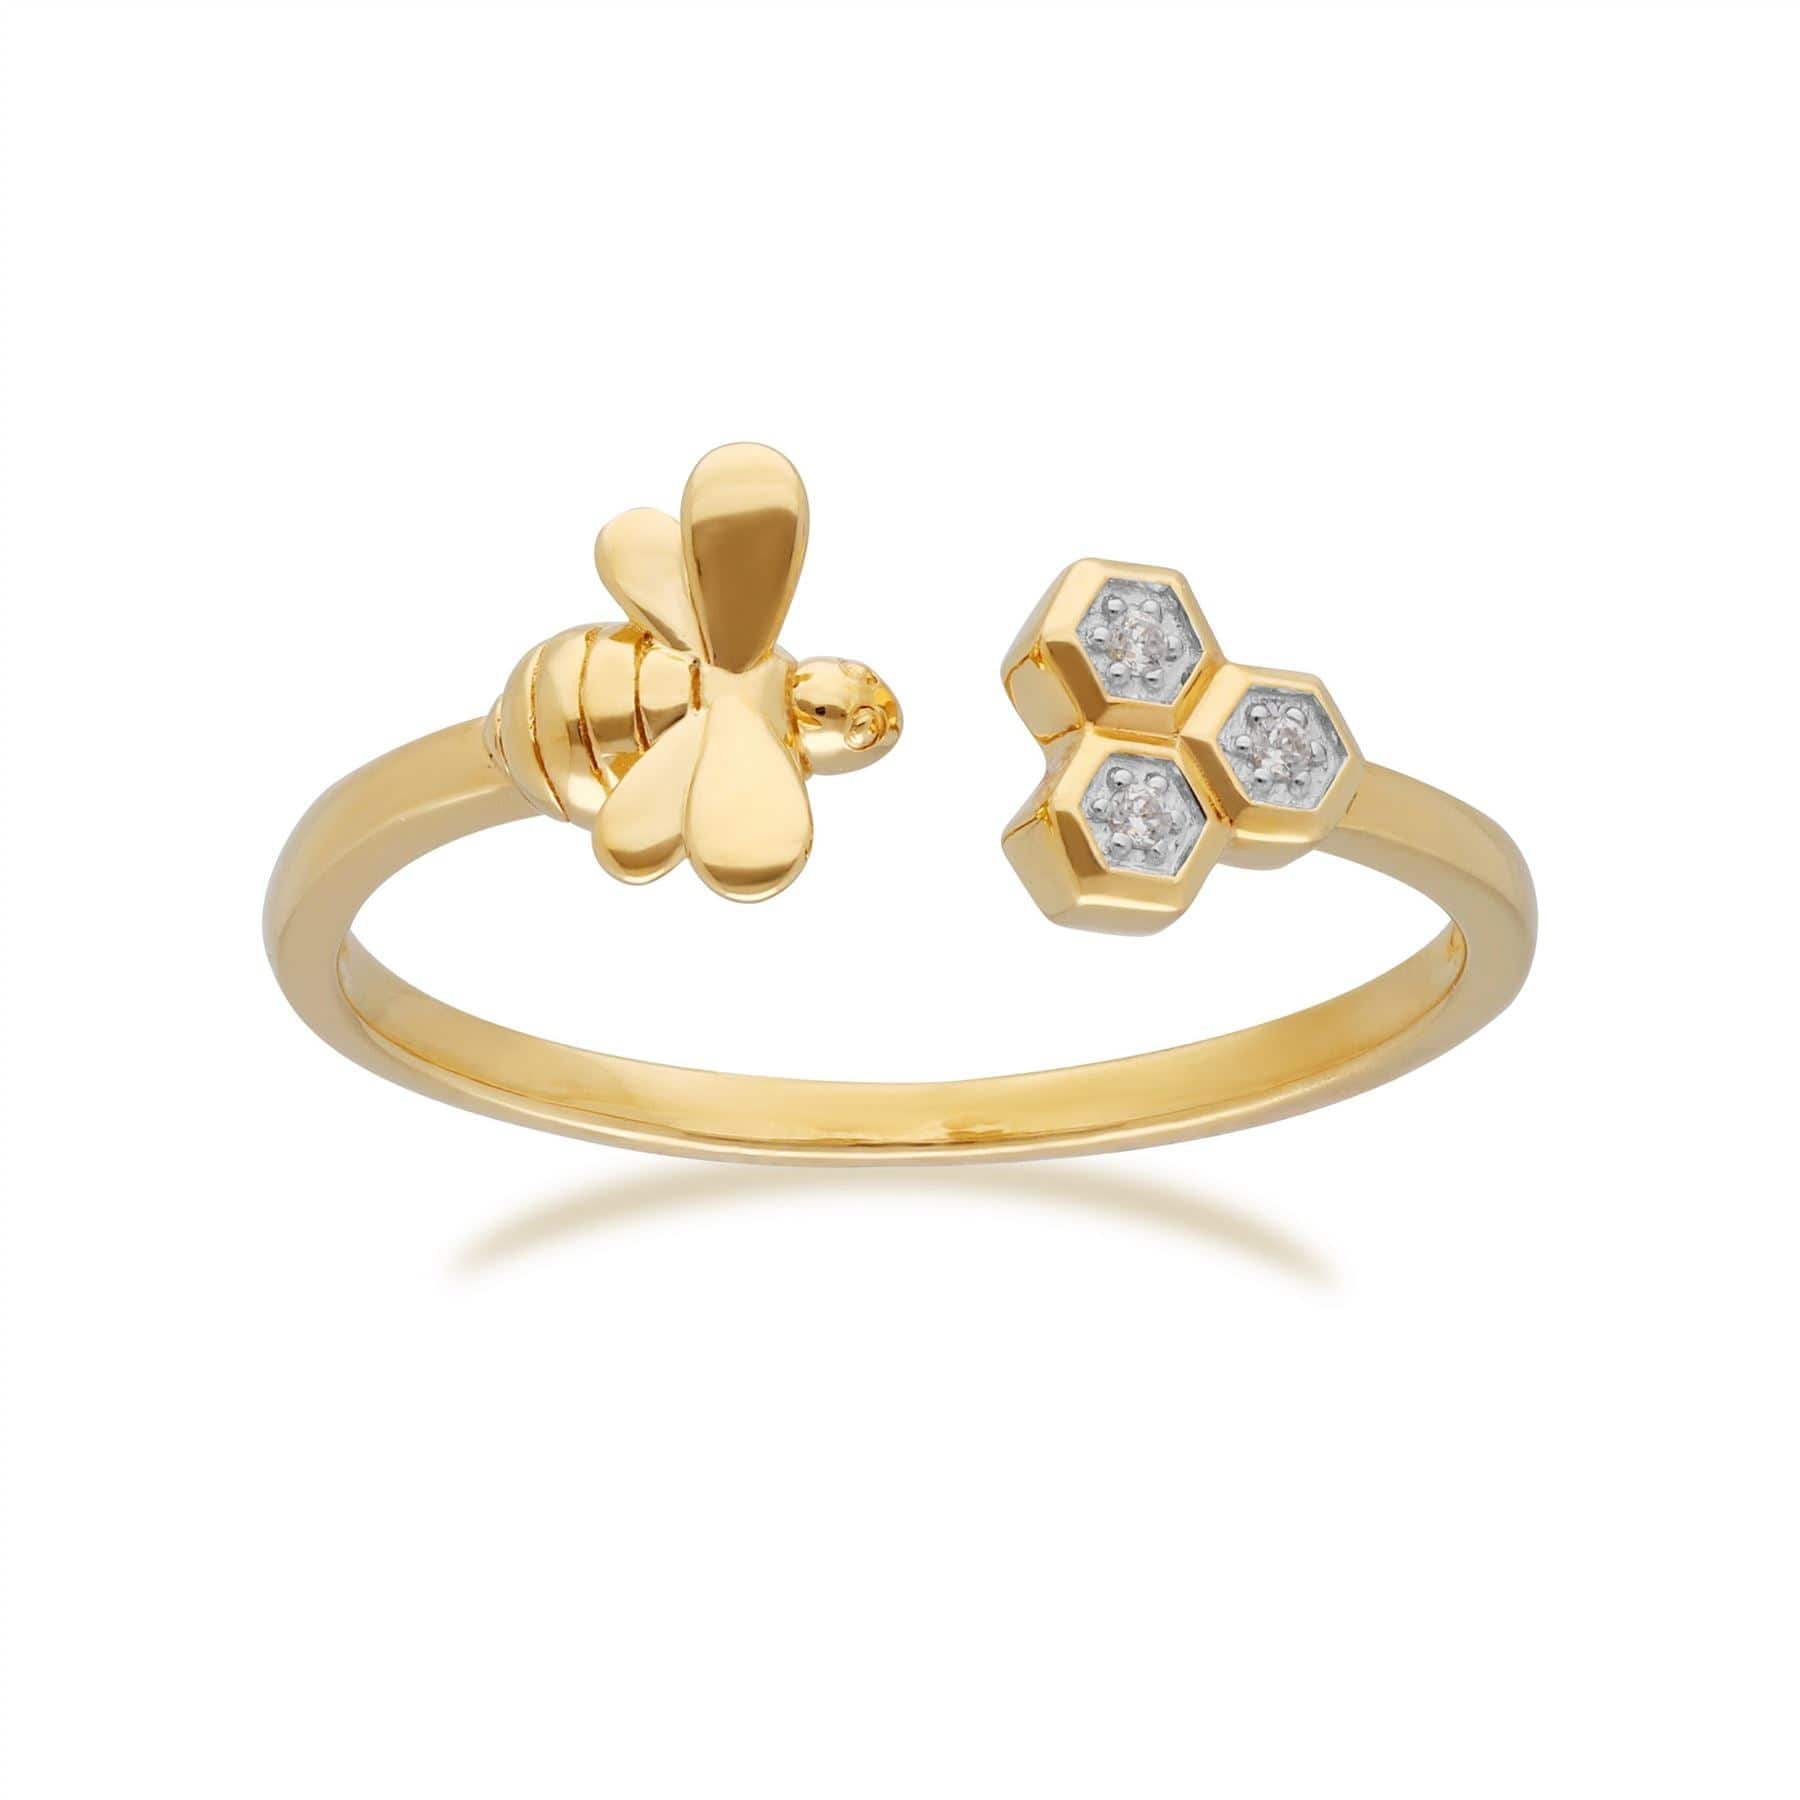 191R0917019 Honeycomb Inspired Diamond Trilogy Bee Ring in 9ct Yellow Gold 4